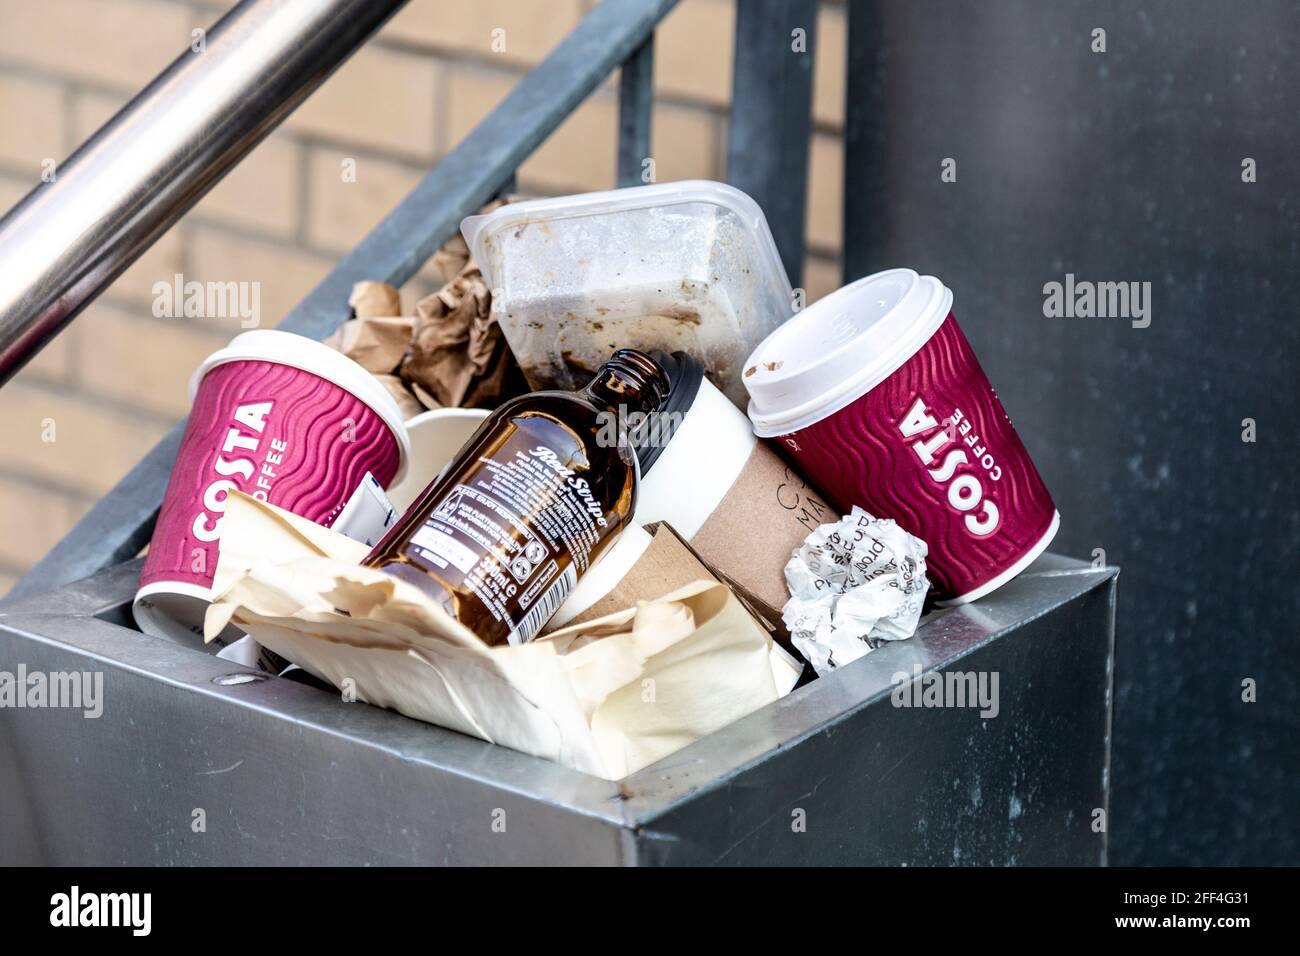 Disposable coffee cups in an overflowing bin, London, UK Stock Photo